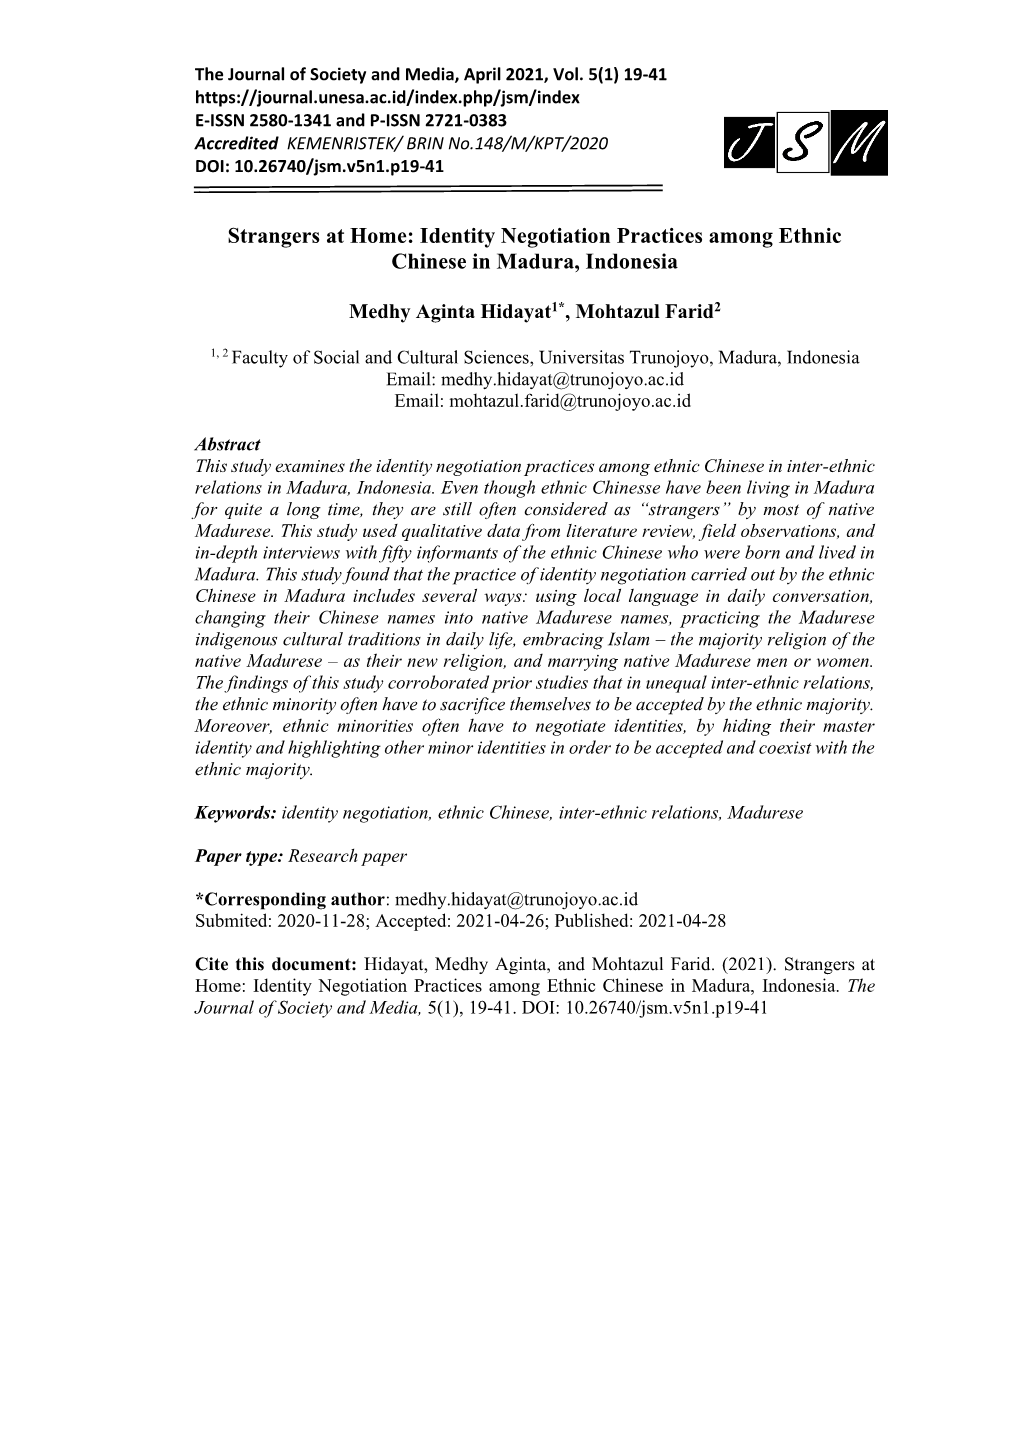 Identity Negotiation Practices Among Ethnic Chinese in Madura, Indonesia